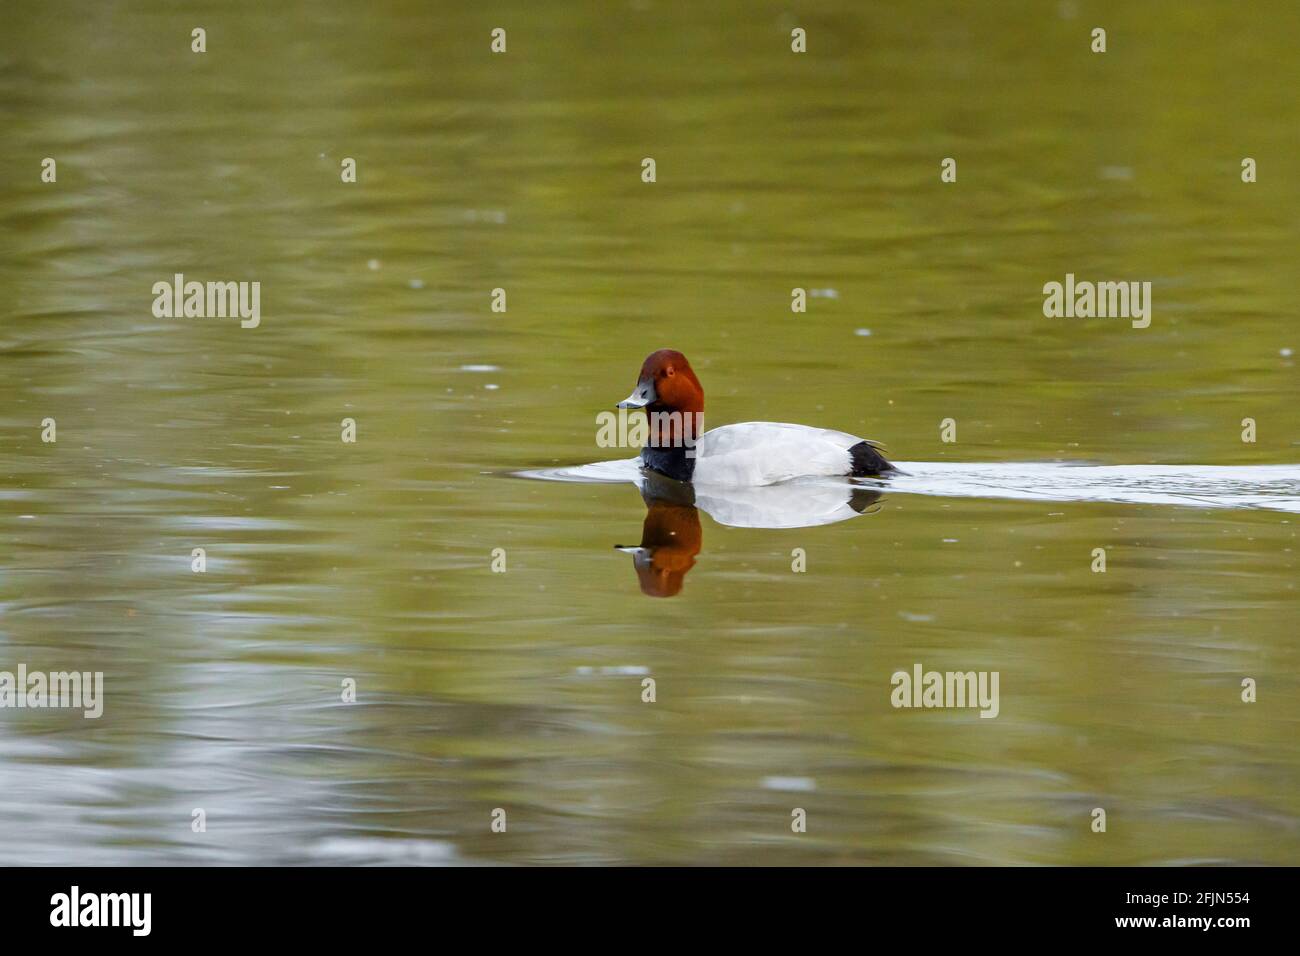 A pochard duck in the water Stock Photo